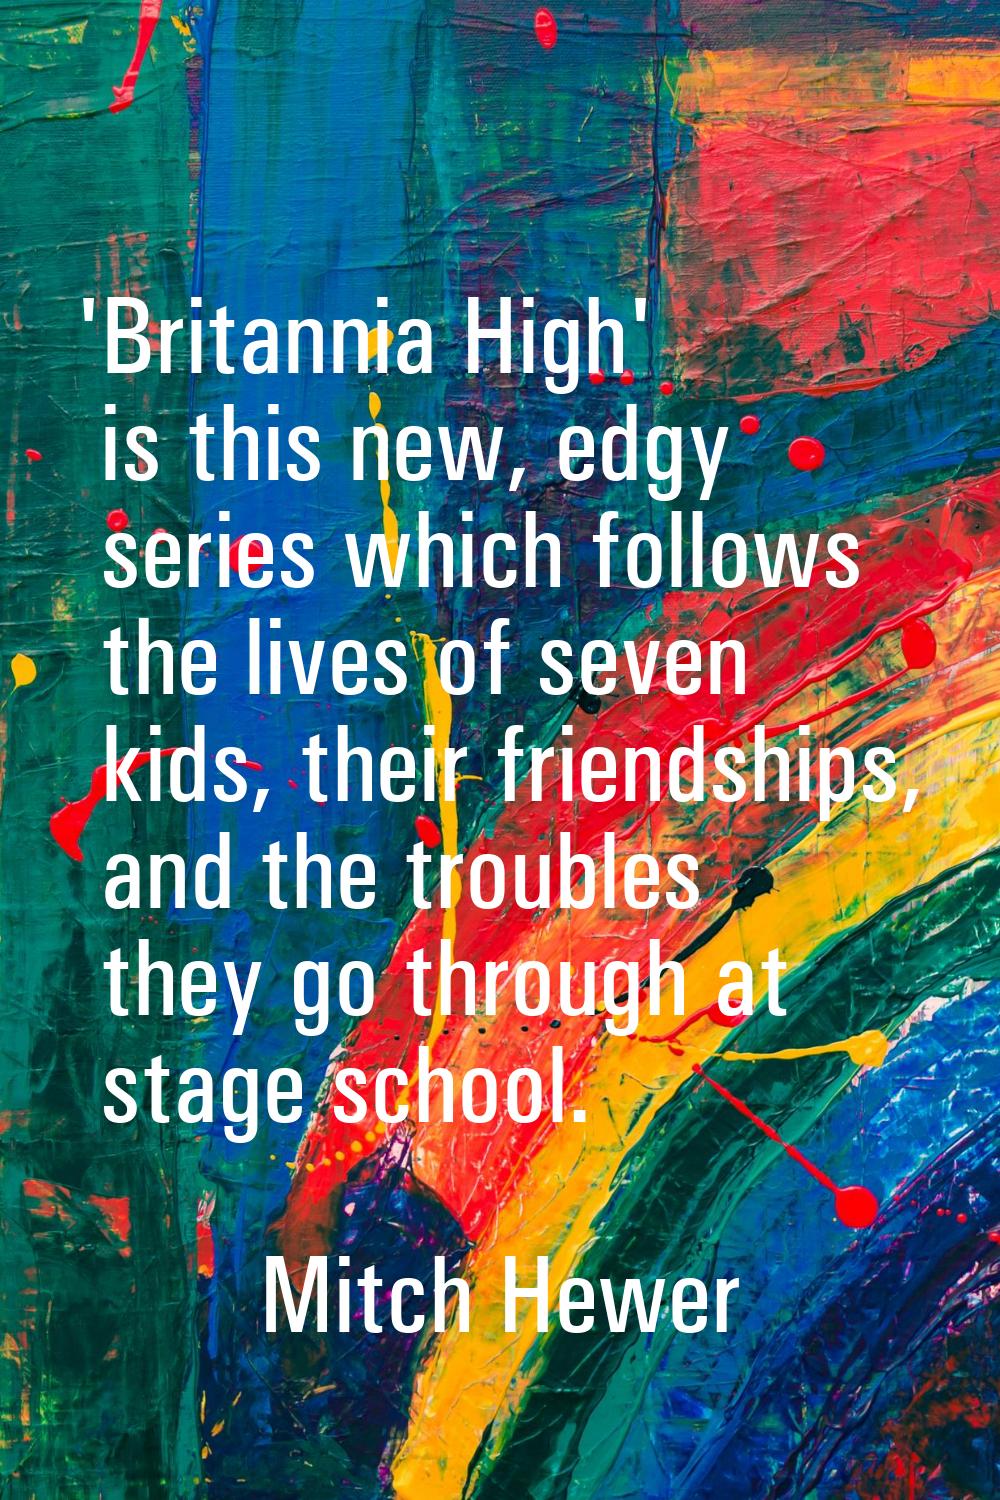 'Britannia High' is this new, edgy series which follows the lives of seven kids, their friendships,